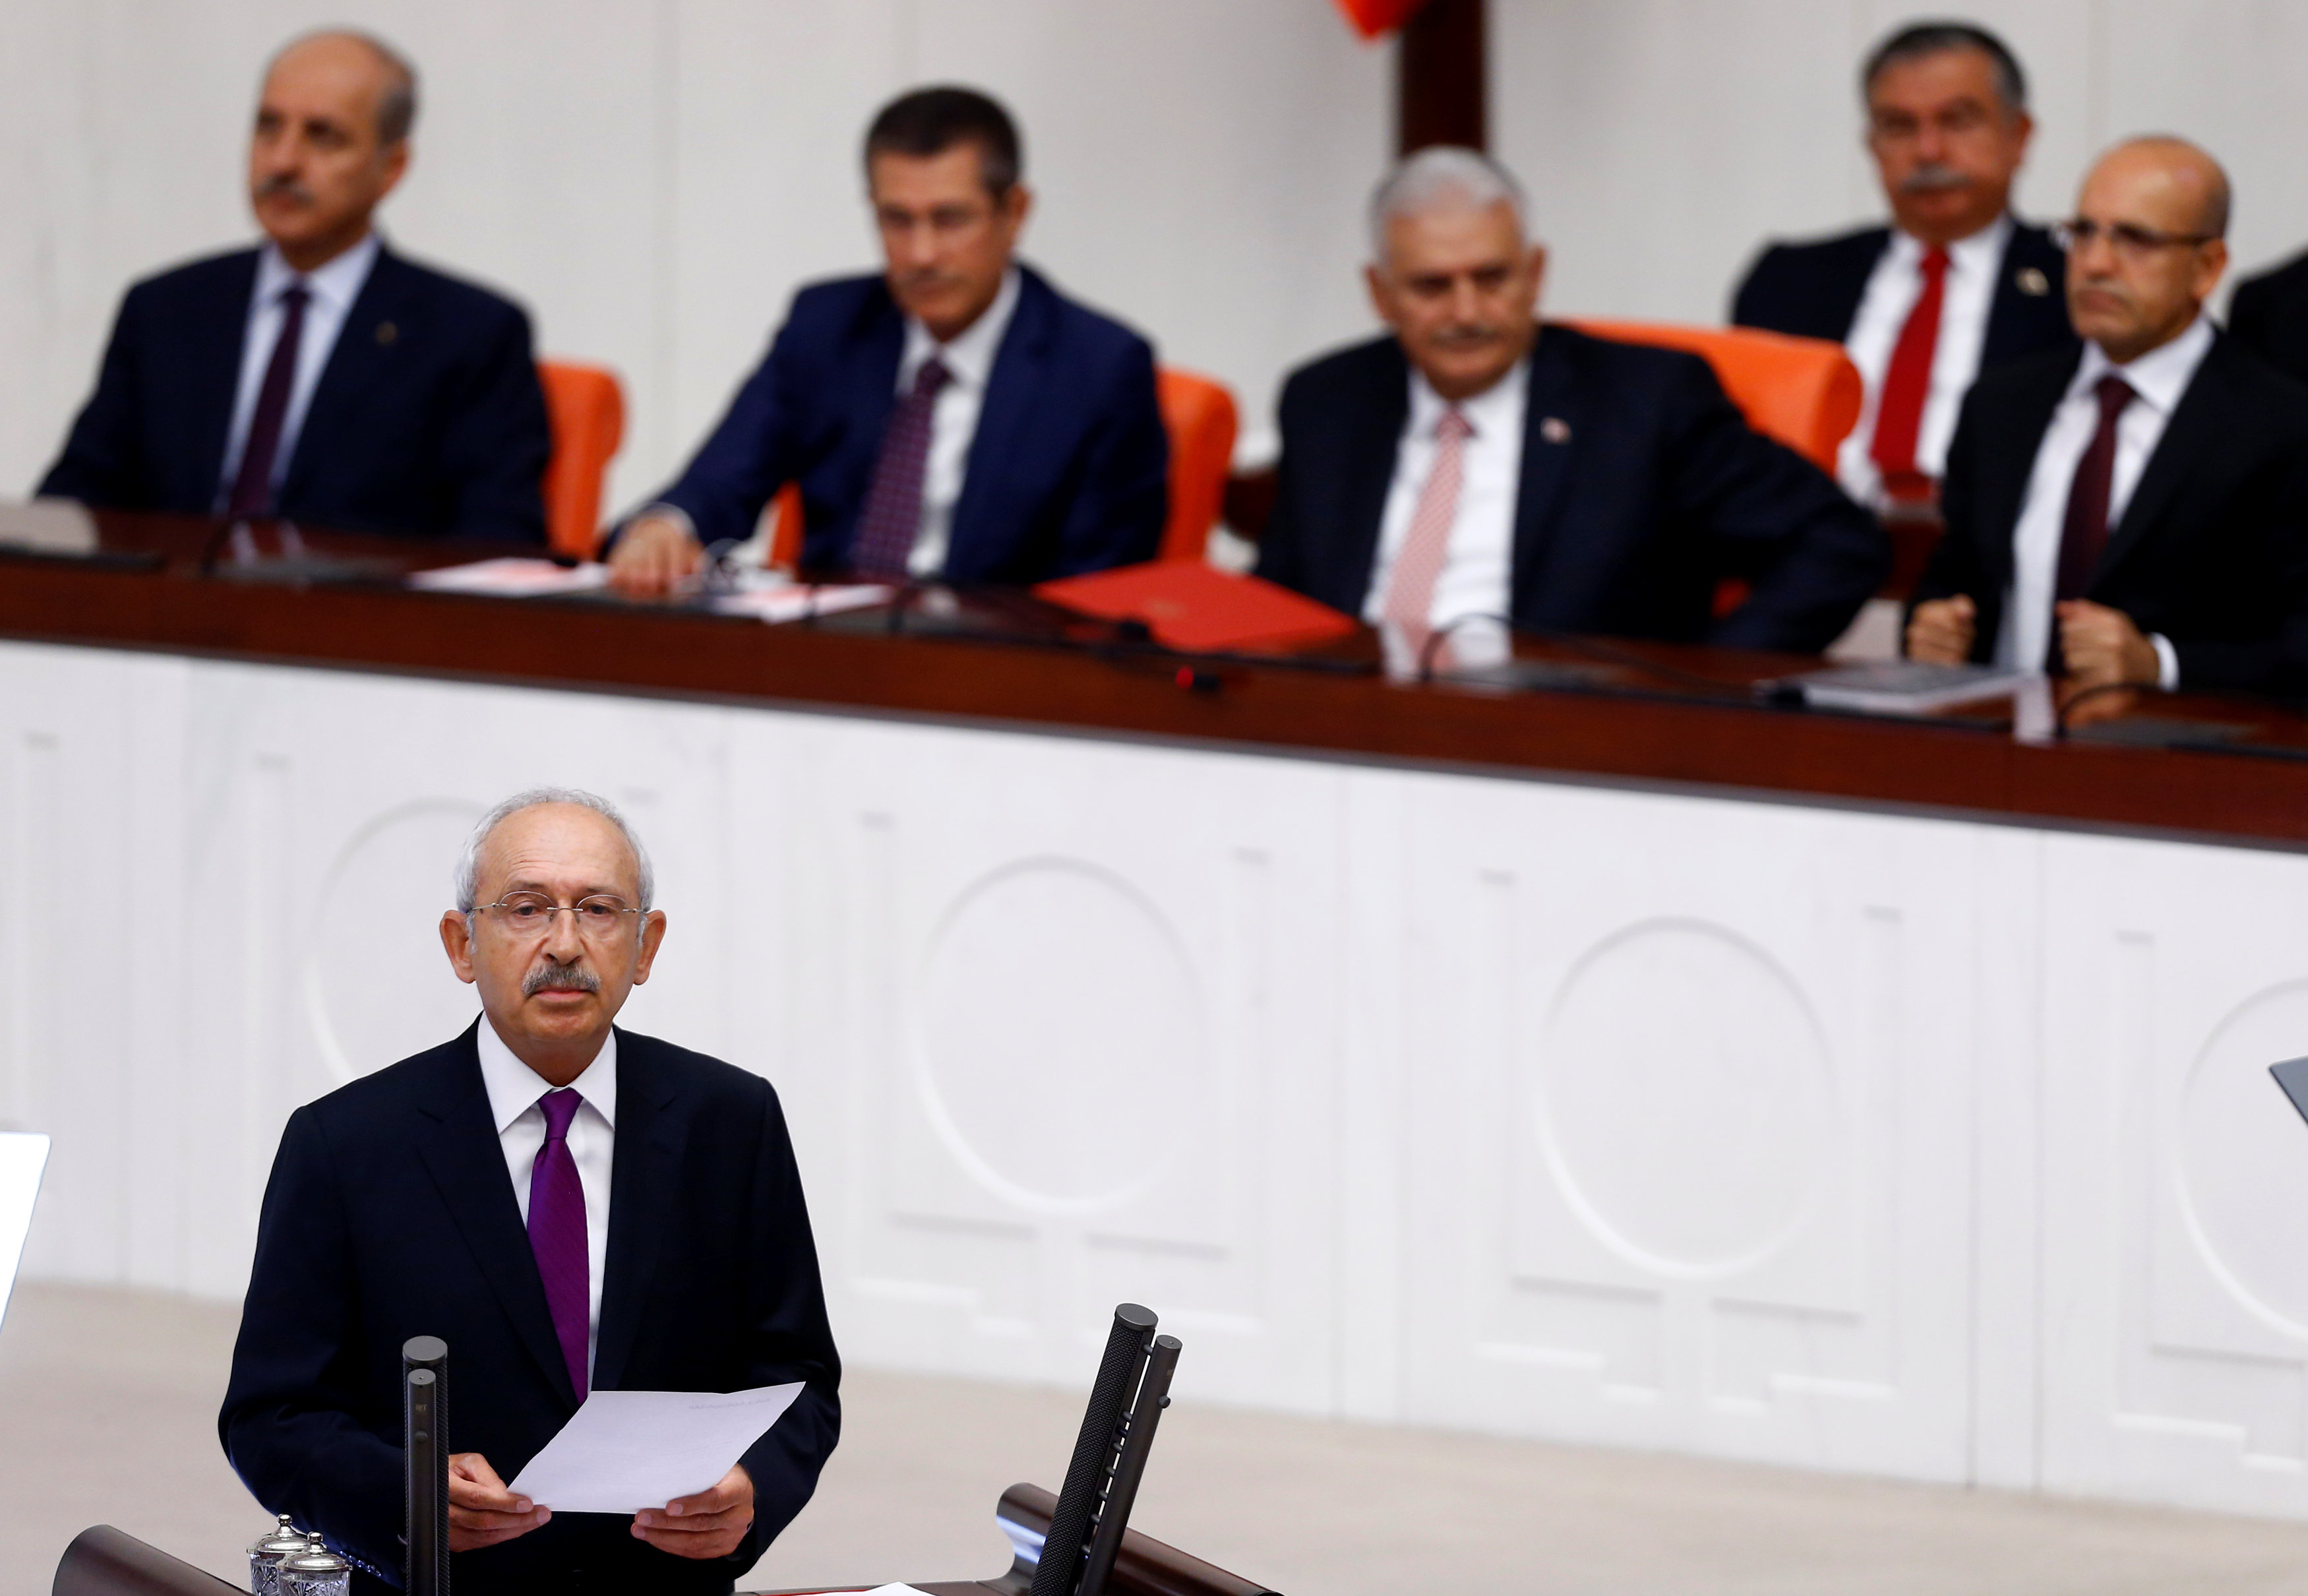 In pictures: Turkish parliament session on attempted coup anniversary